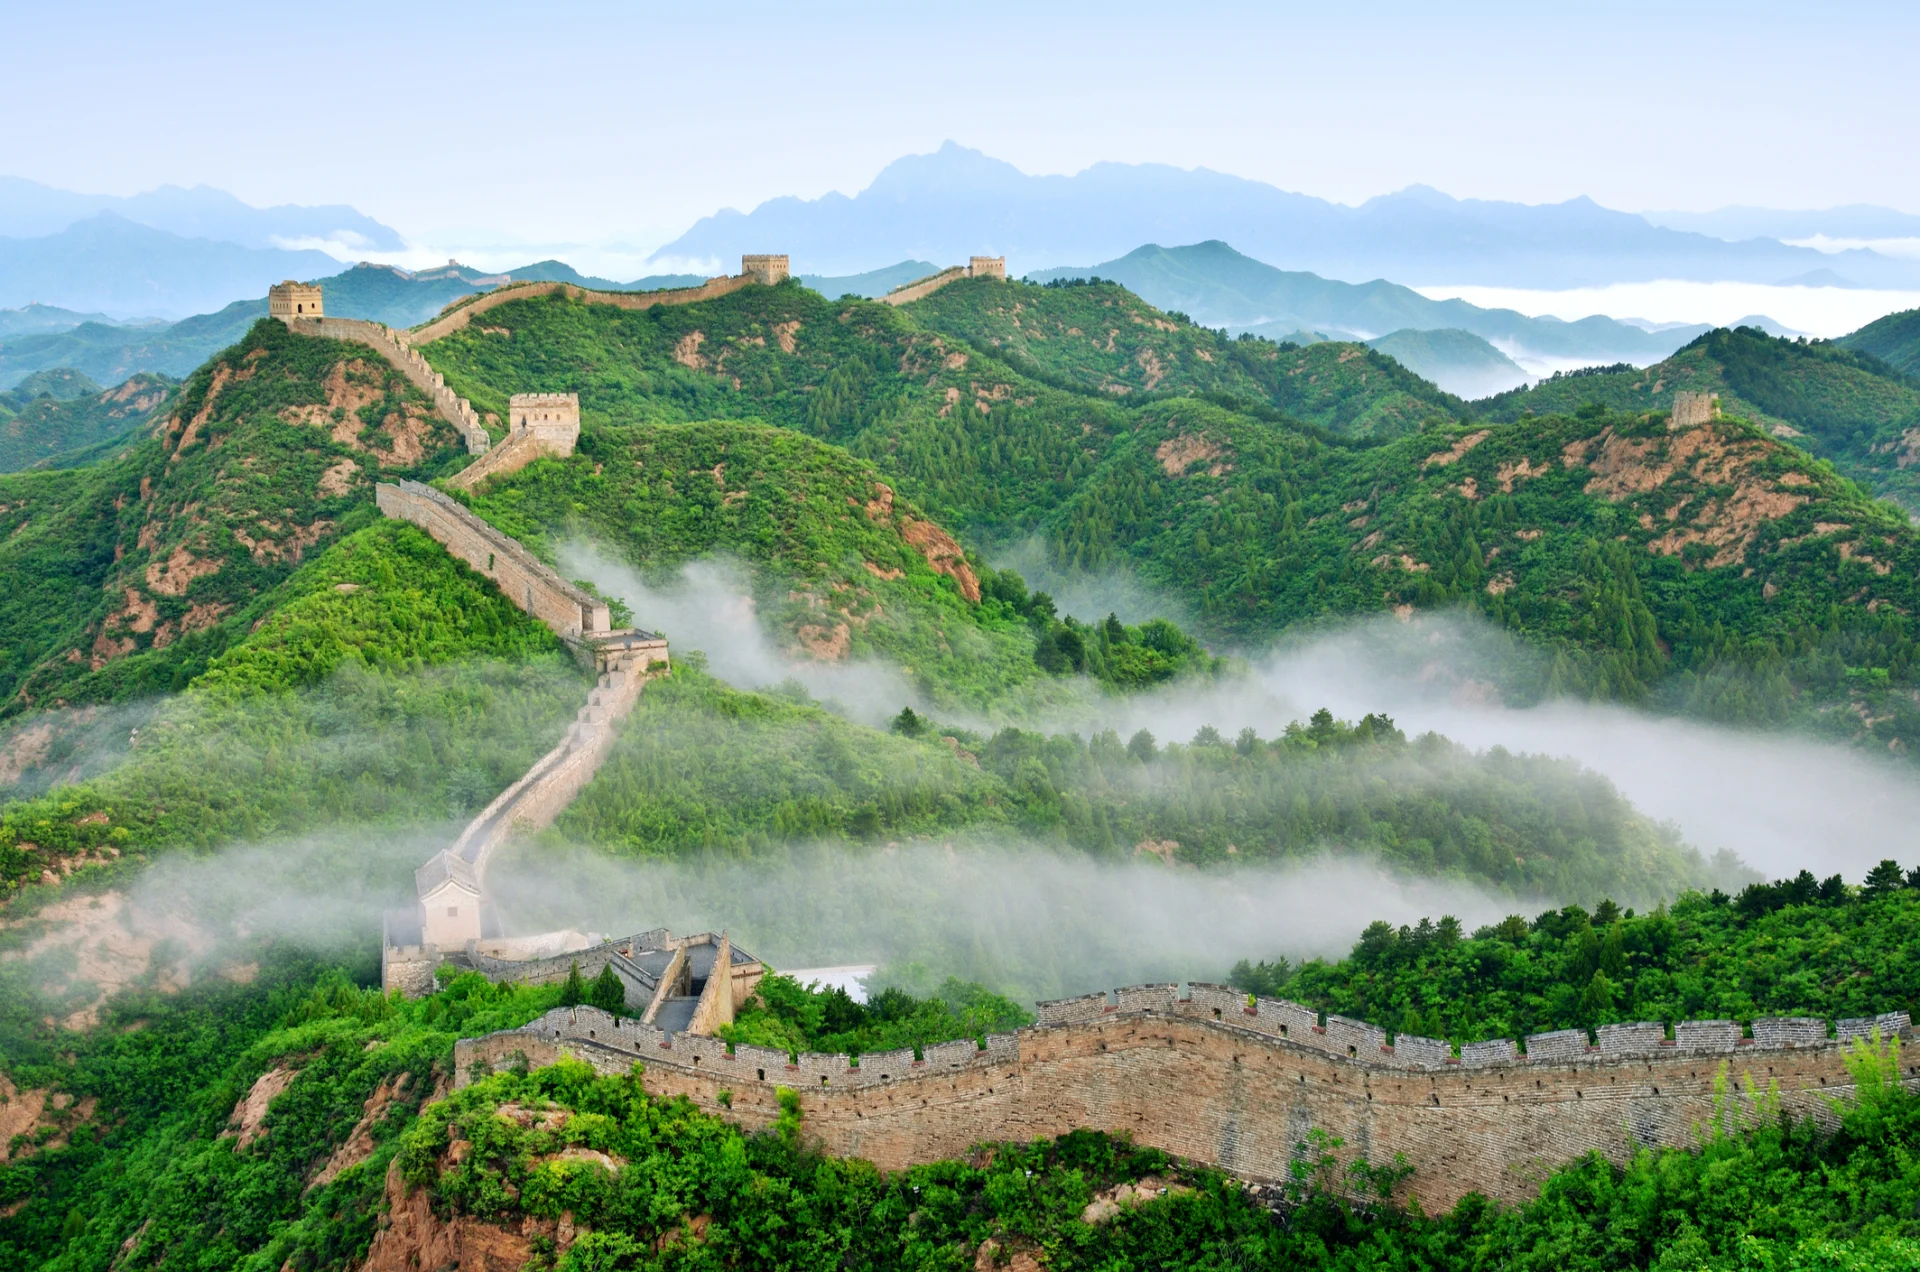 Scenic image of the Great Wall of China